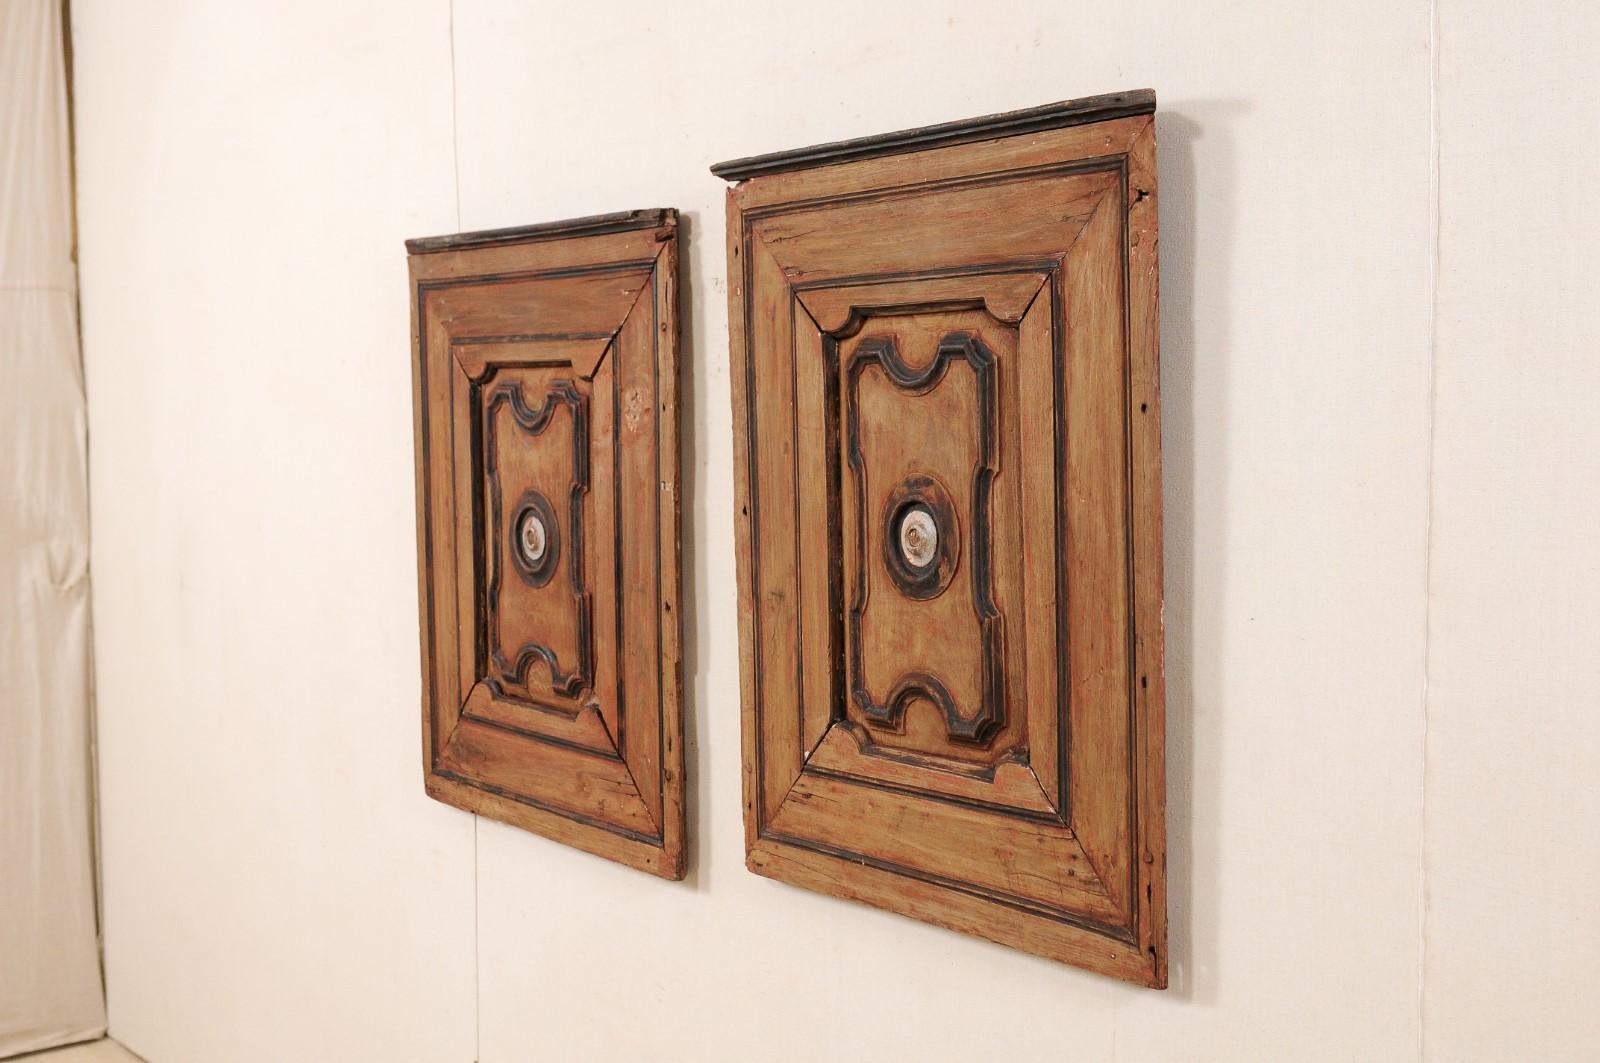 Pair of Italian Decorative Wall Panels from Turn of 18th-19th Century  6